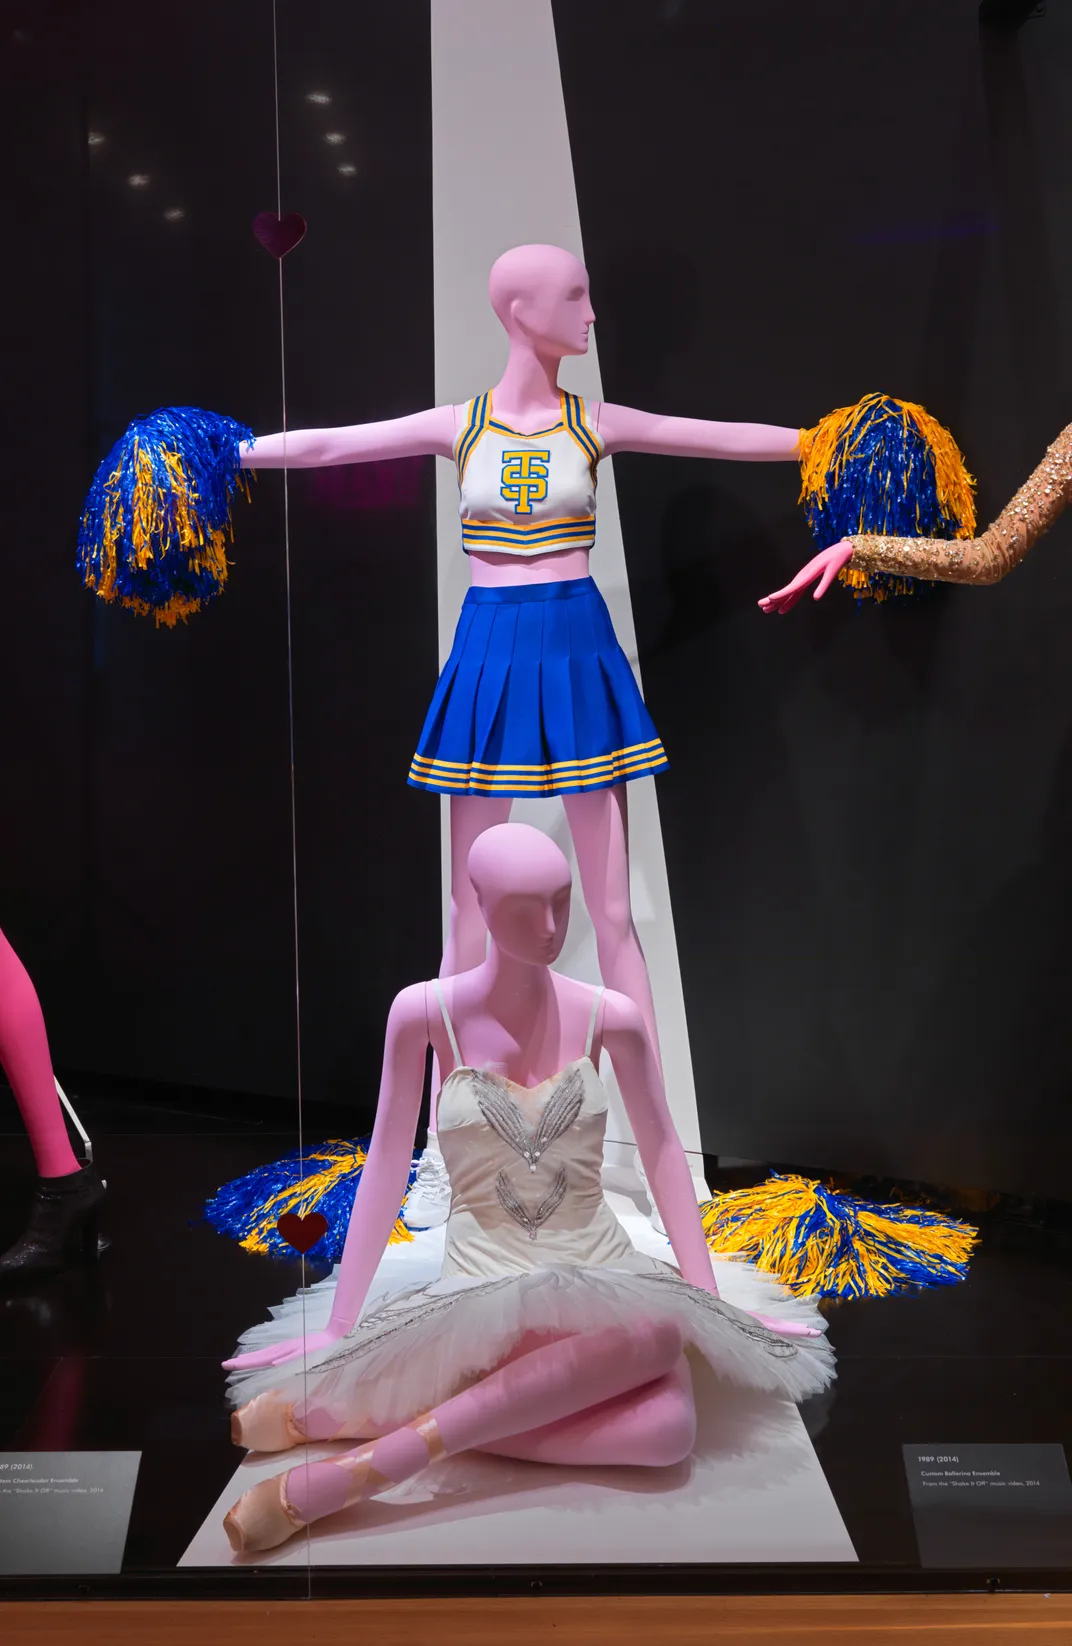 Cheerleader and ballerina outfits